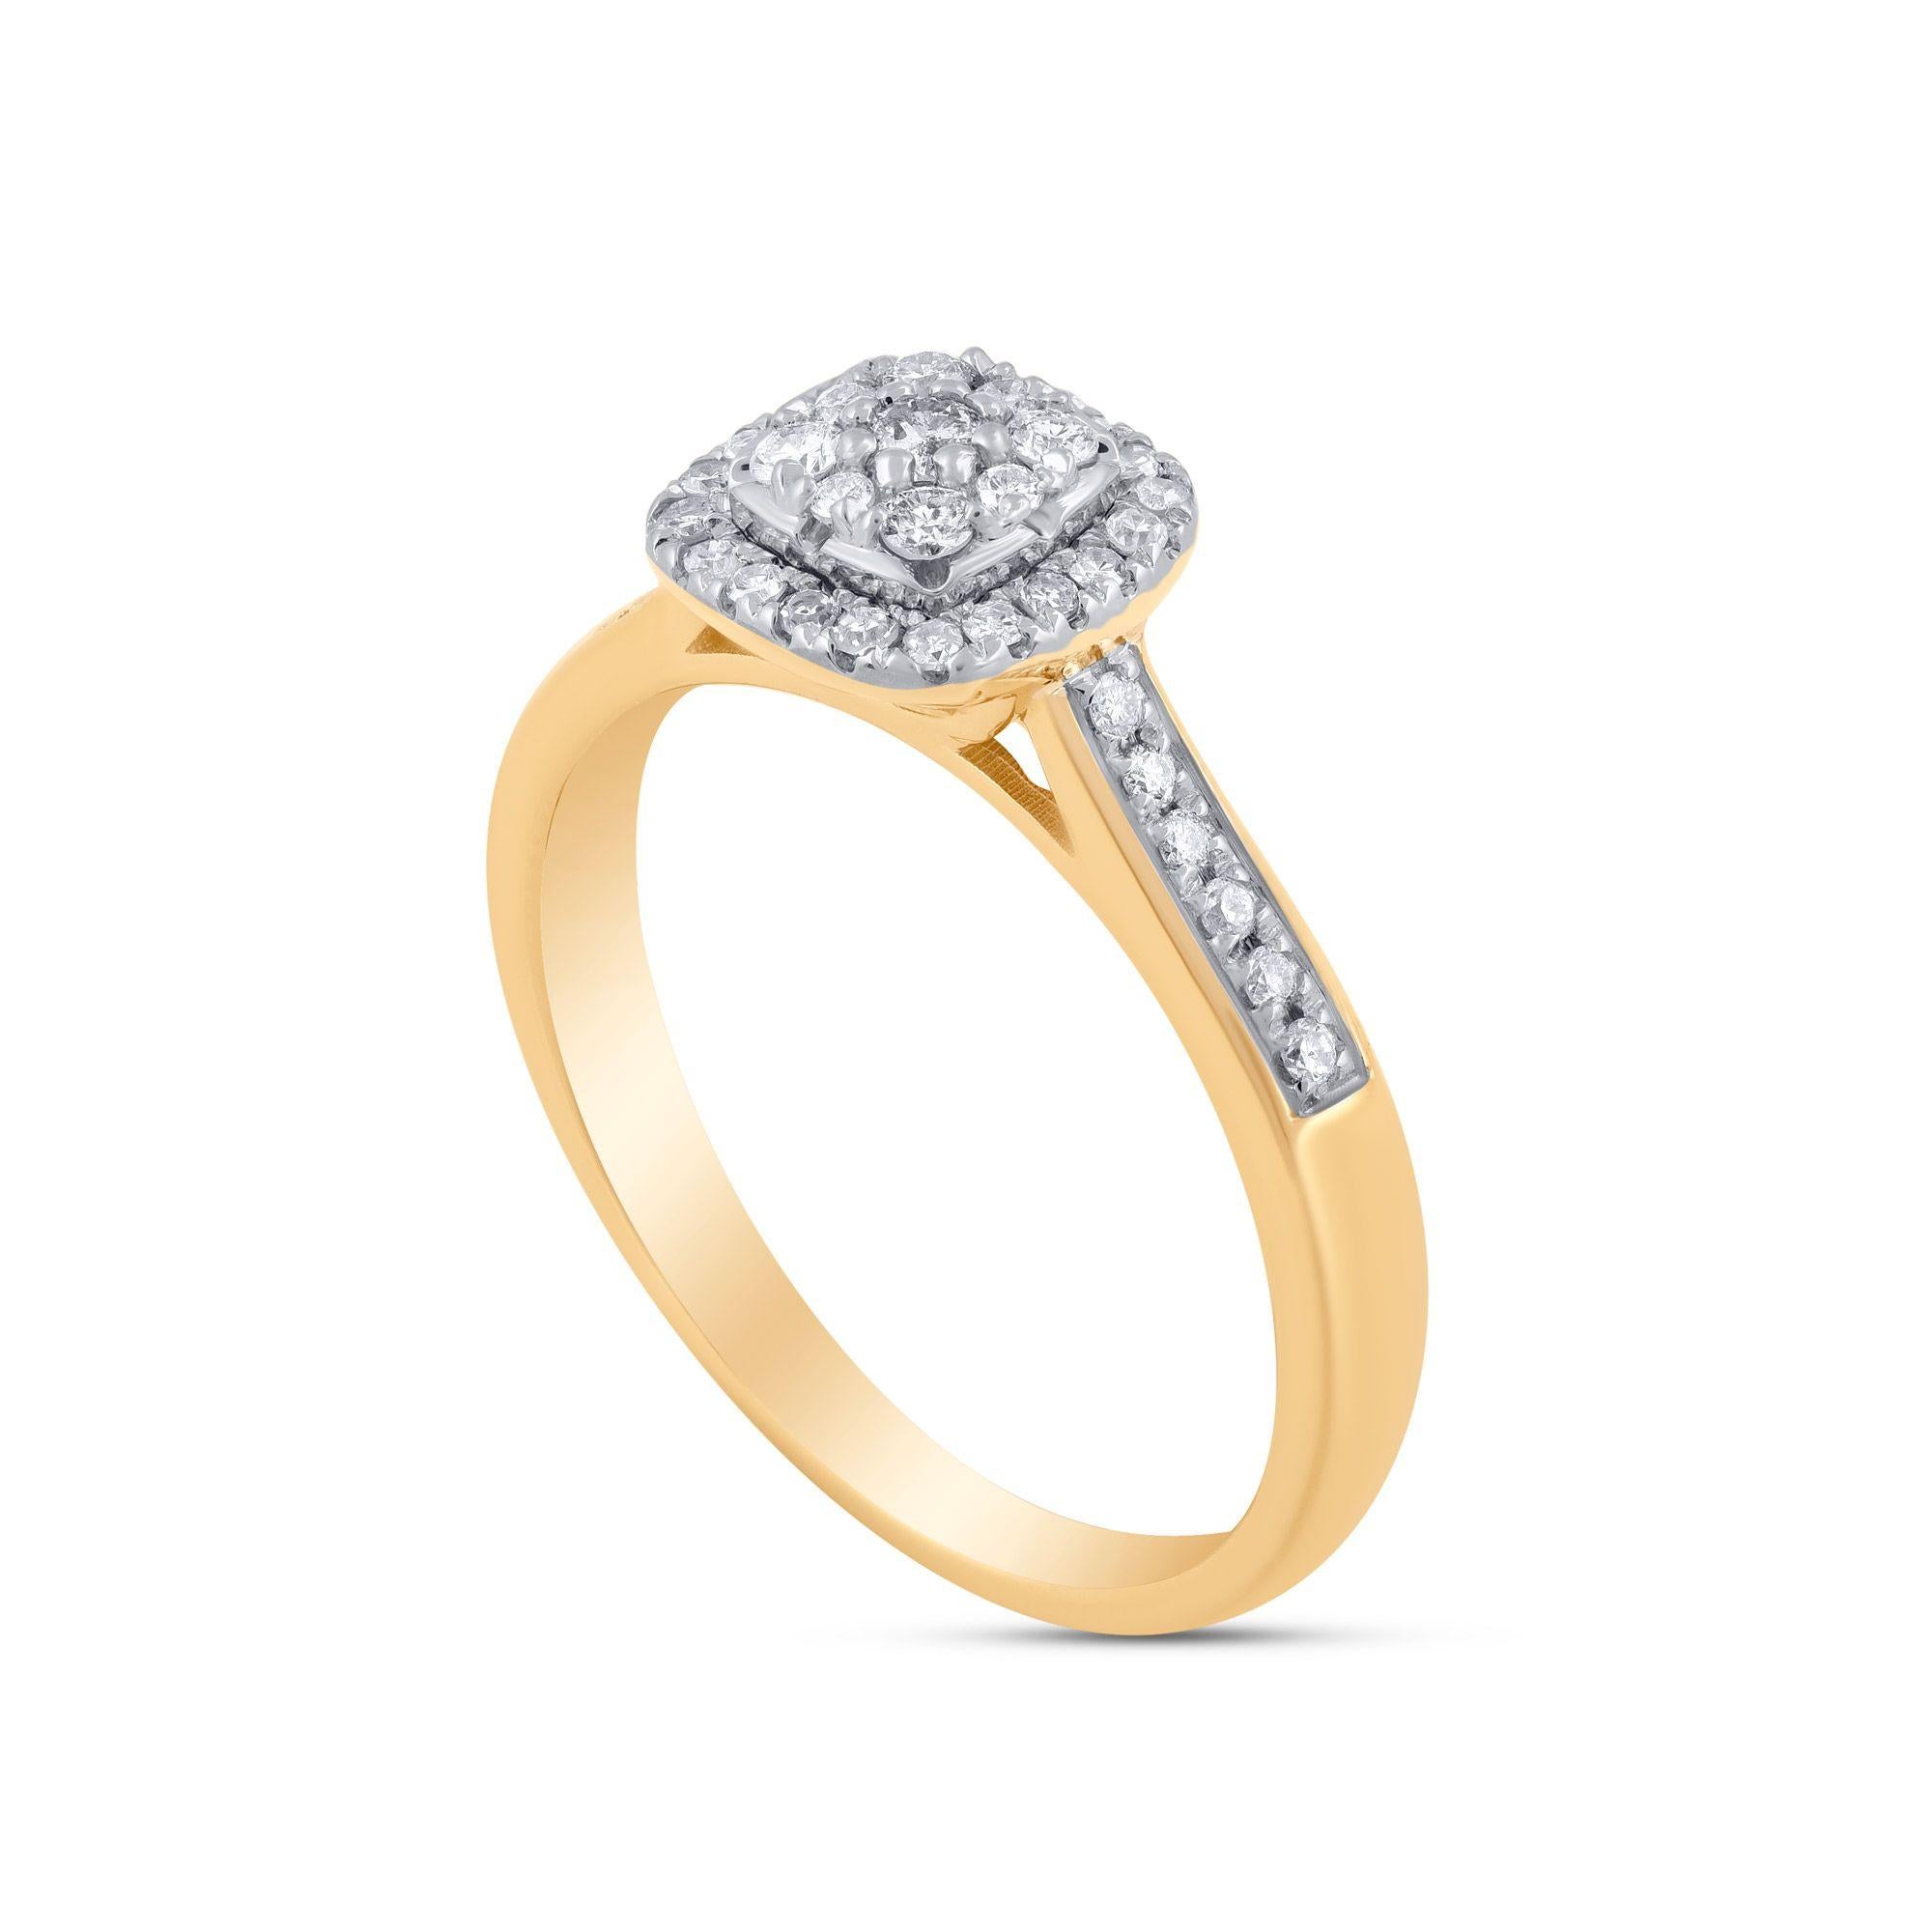 Dazzling ring studded with 41 diamonds in prong and micropave setting. Crafted in 10kt gold, diamonds are graded H-I Color, I2-I3 Clarity. 
